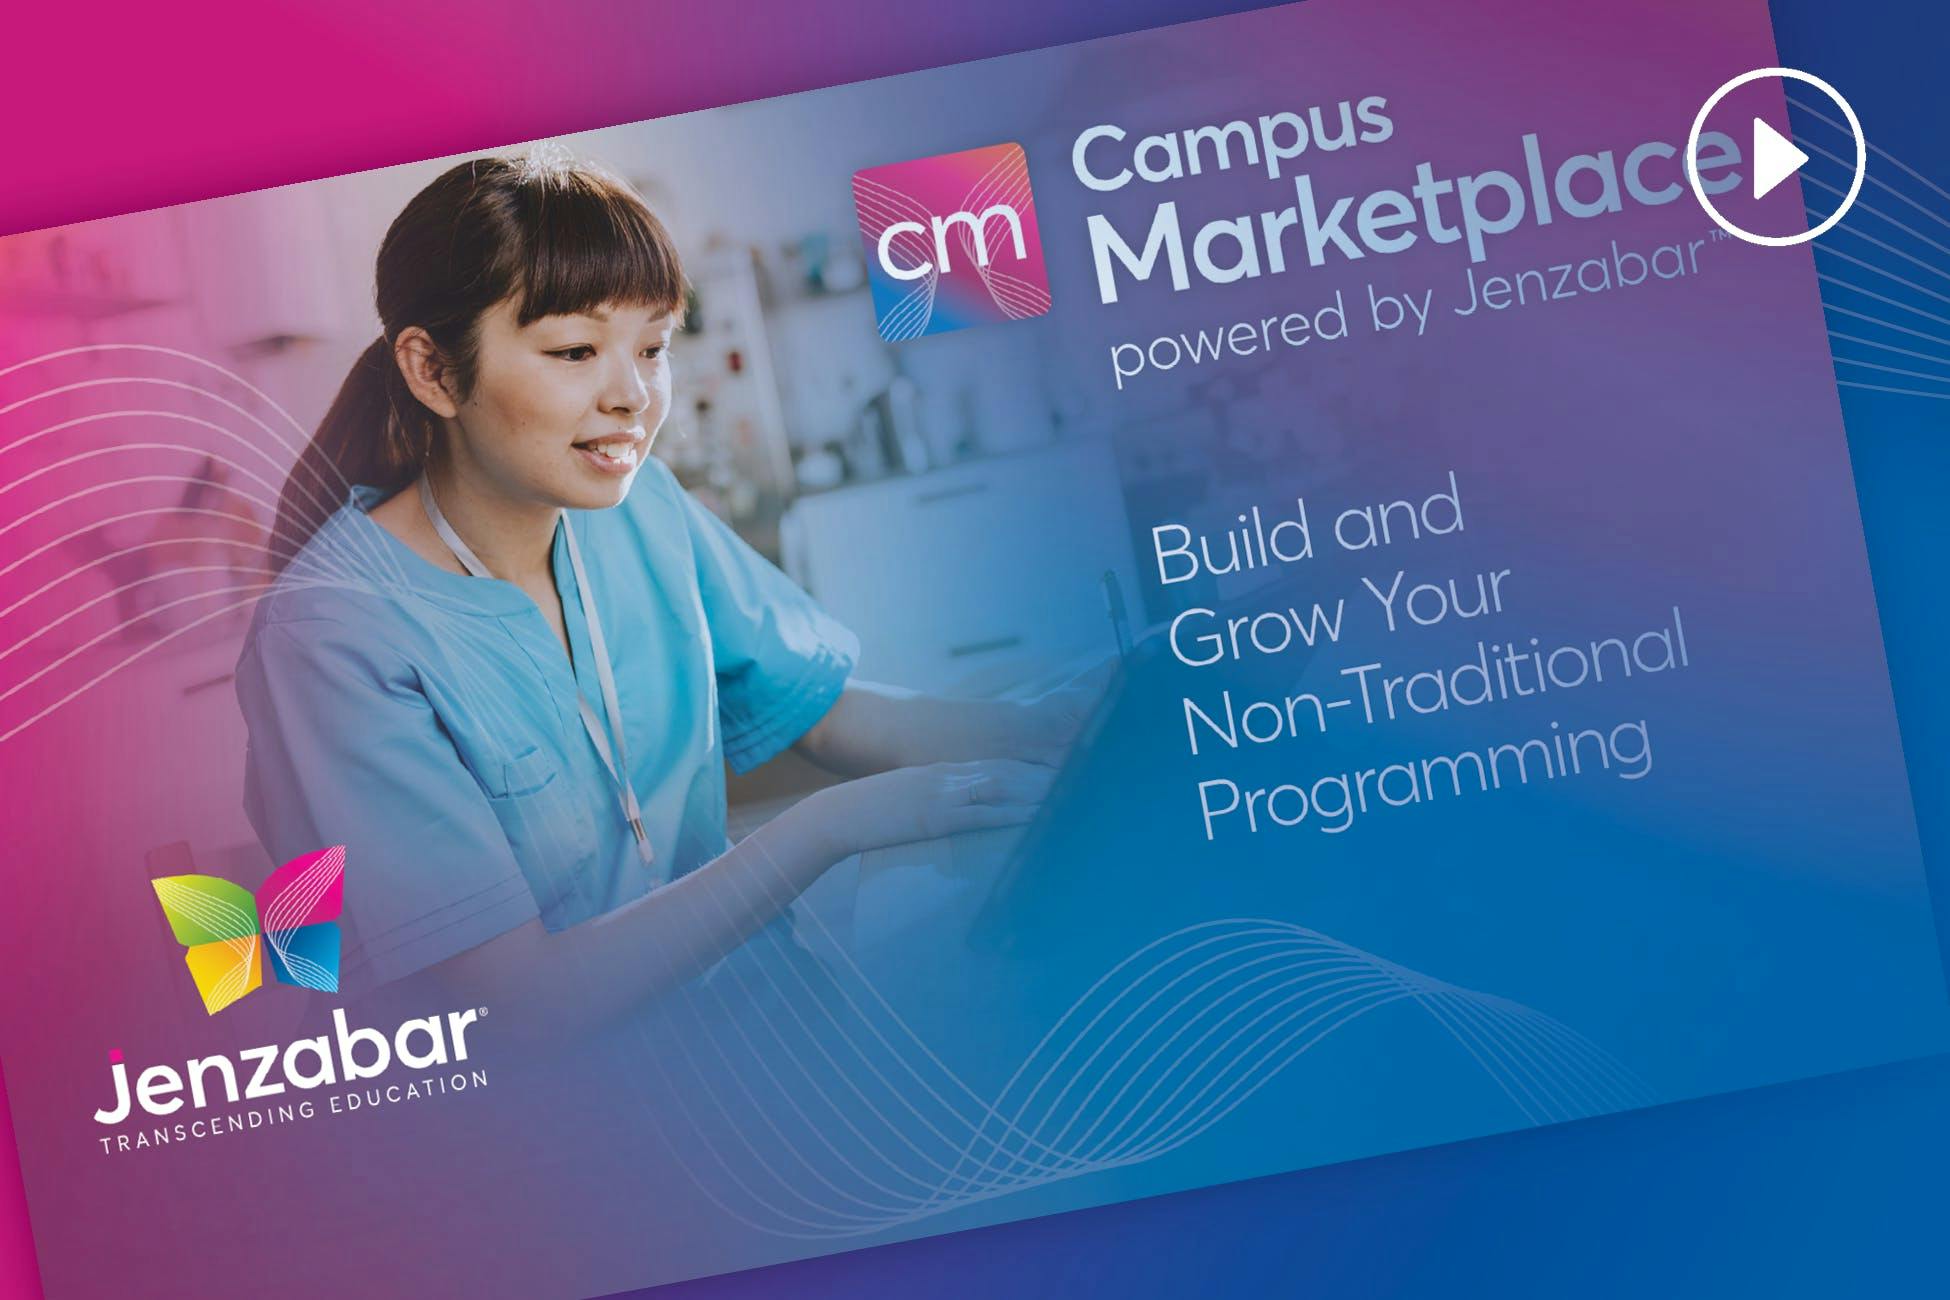 Campus Marketplace powered by Jenzabar